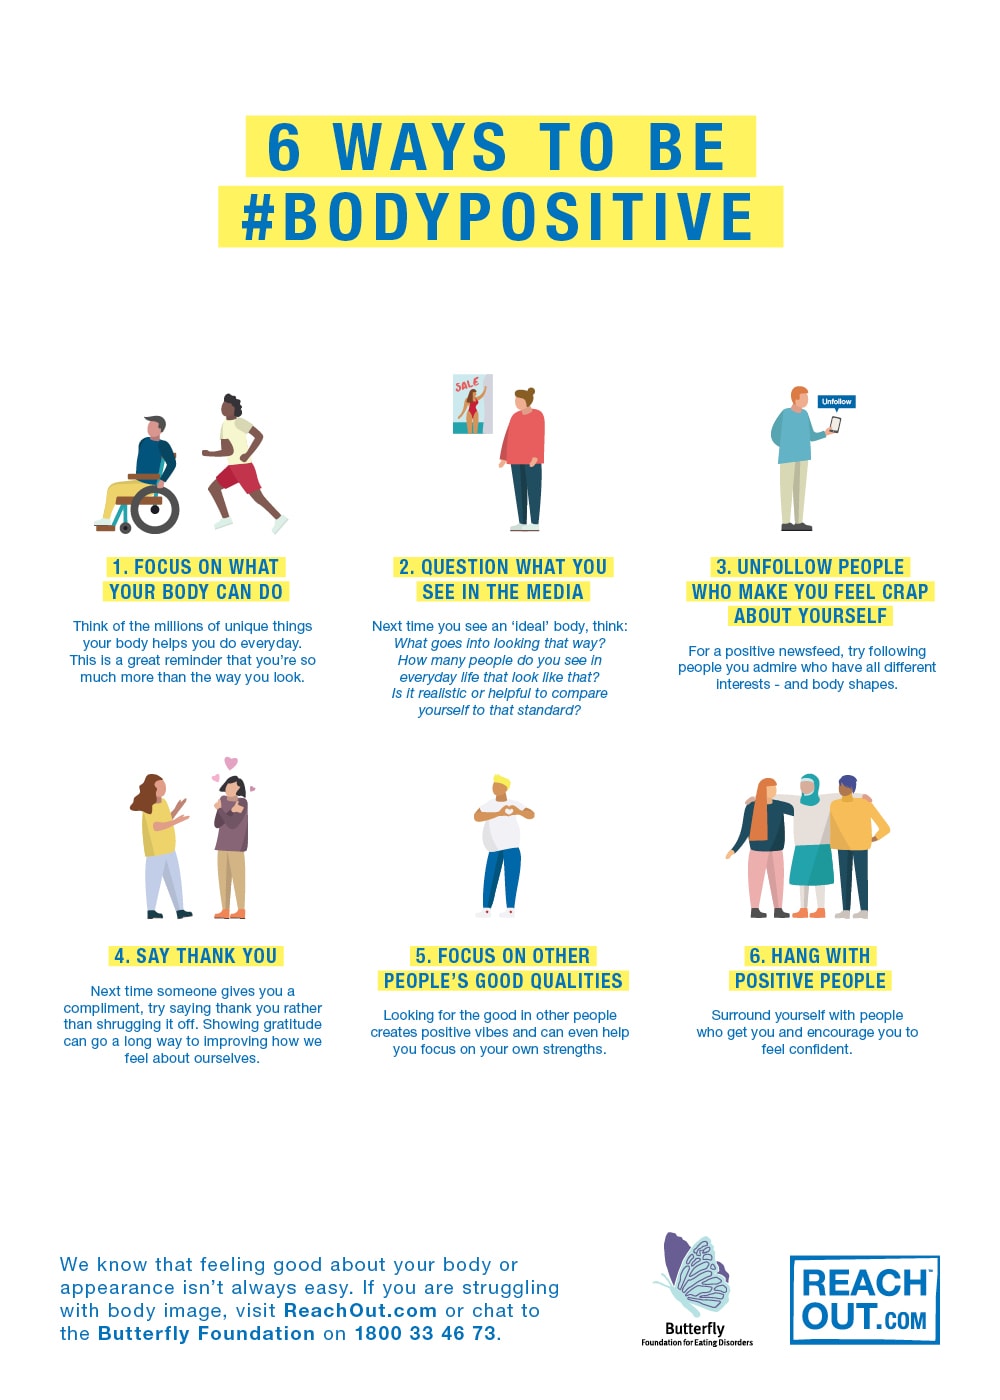 6 ways to be #bodypositive, Body image